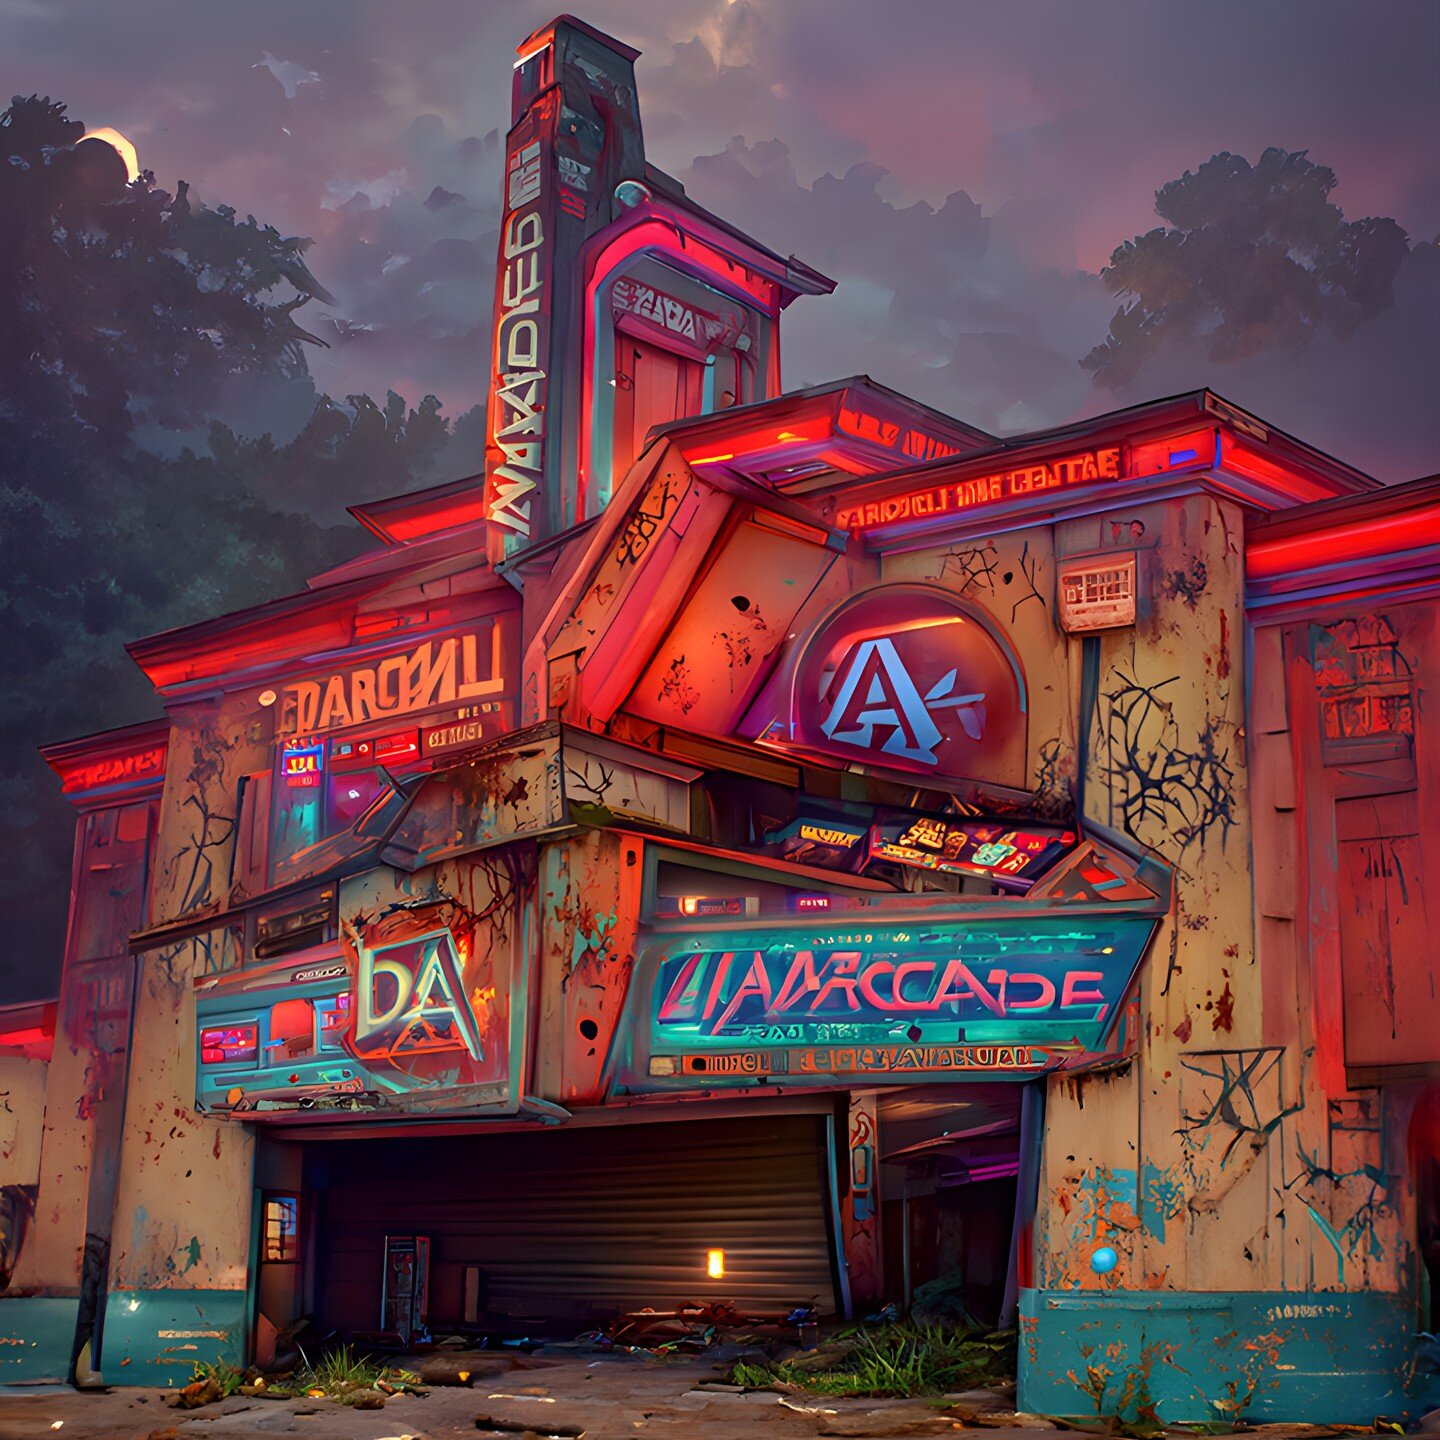 Dysole Arcade

Made with #discodiffusion 

#arcade #retro #vintage #arcadegames #neon #neonlights #strangerthings #abandoned #abandonedplaces #architecture #conceptart #darkart #darkartists #videogames #generativeart #aiart #aiartcommunity #machinele